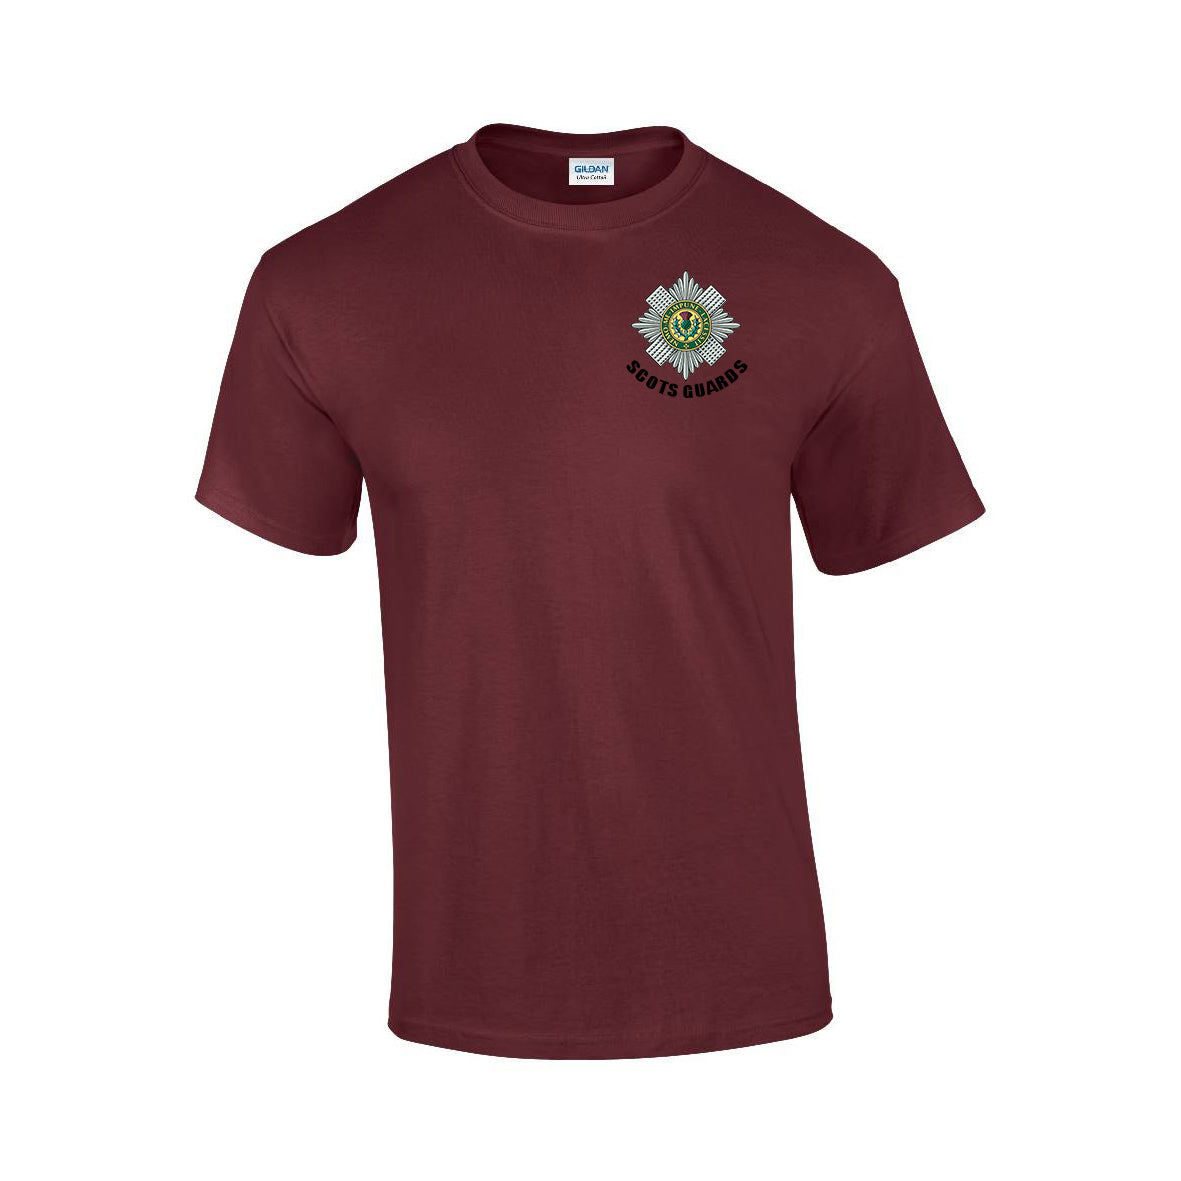 GD02 - Scots Guards Premium Quality Embroidered T-Shirt - Bespoke Emerald Embroidery Ltd